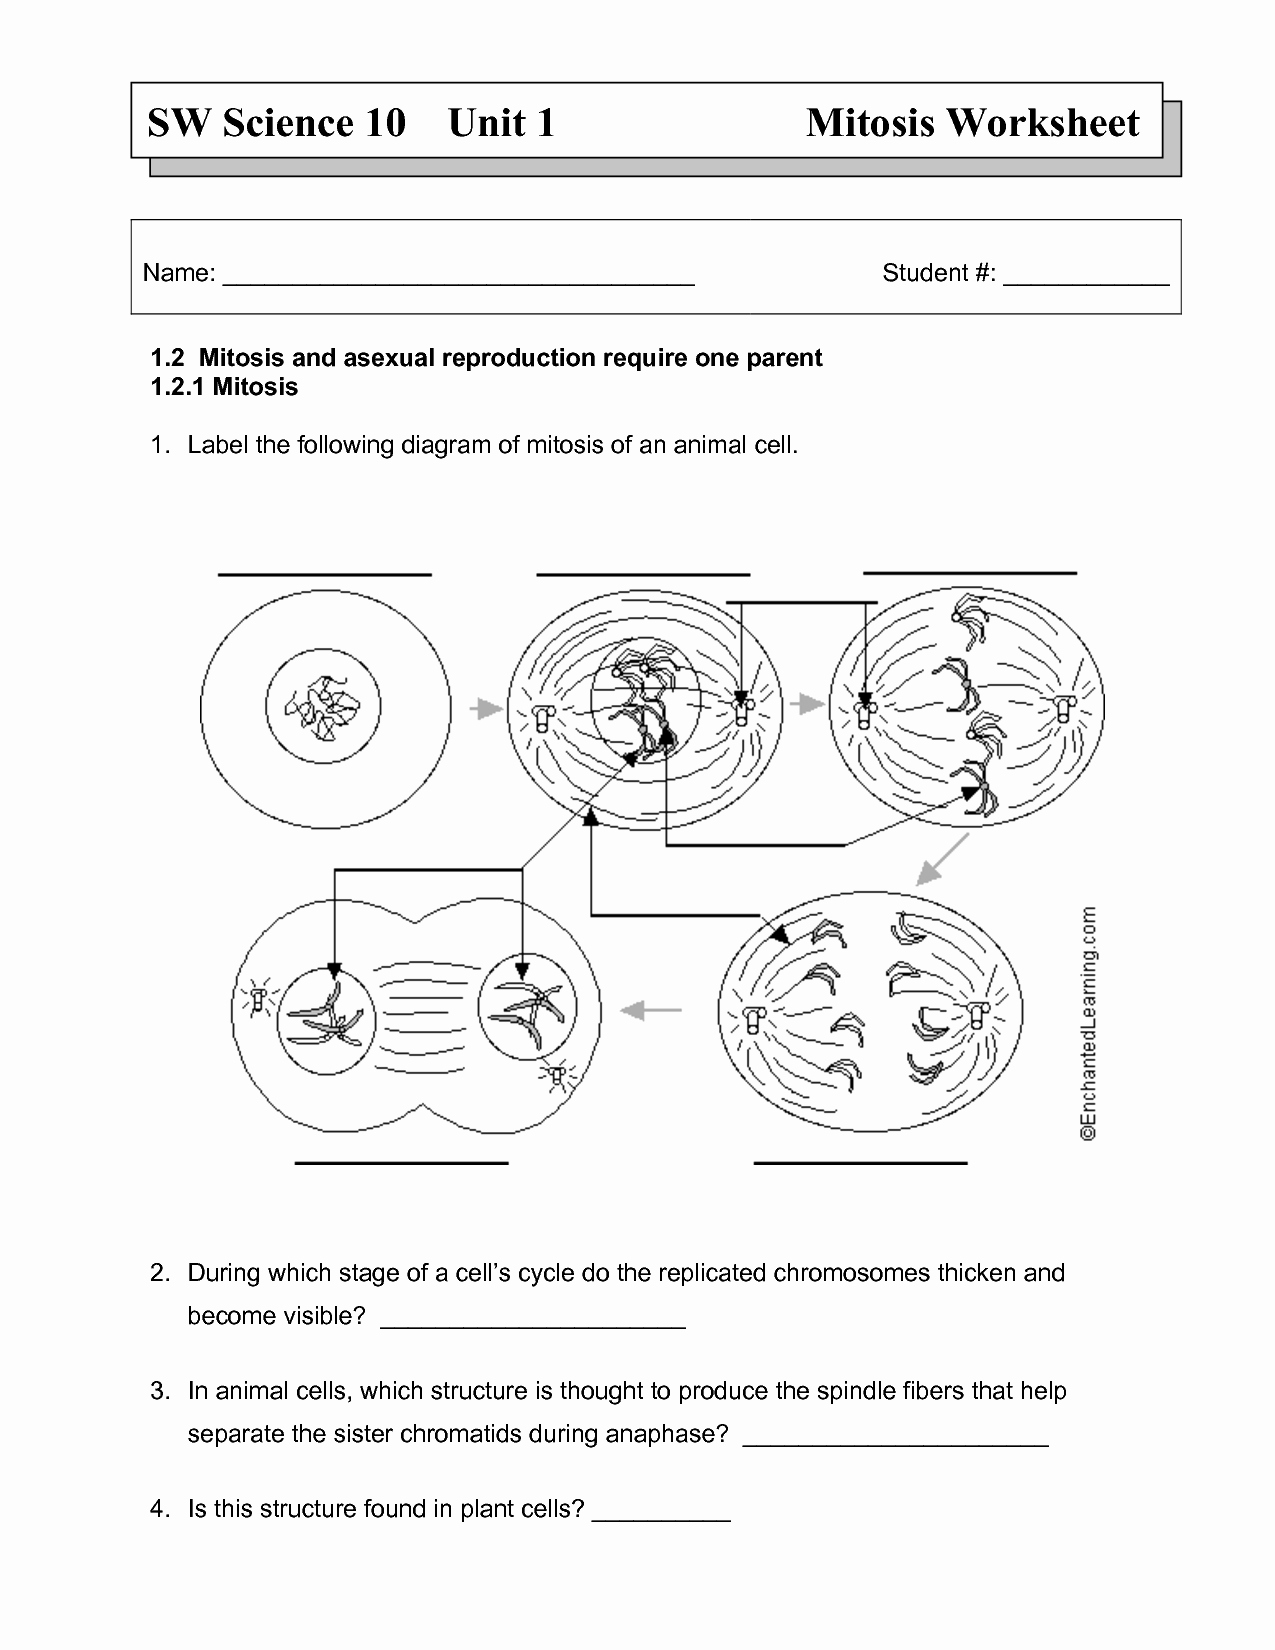 Cell Division Worksheet Answers Awesome Mitosis Worksheet Igcse Pinterest